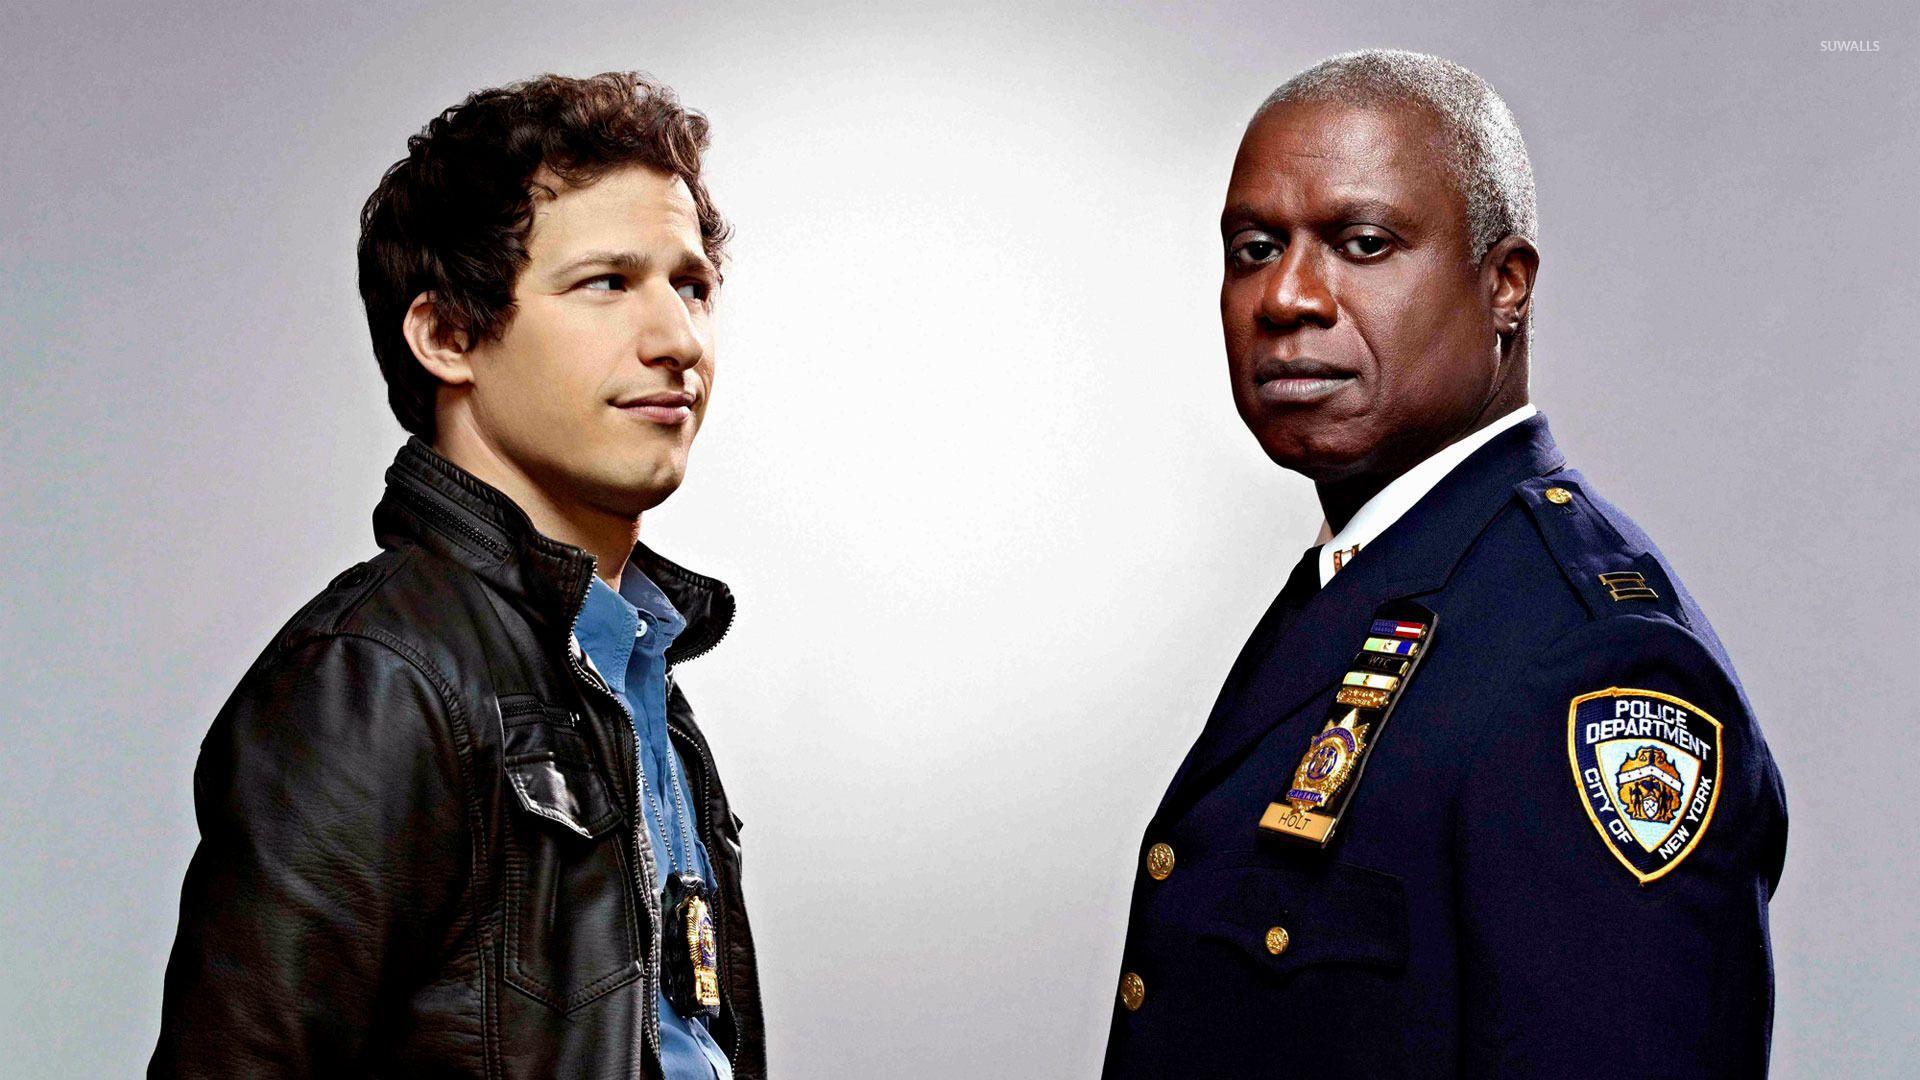 Capt. Holt and Jake Peralta